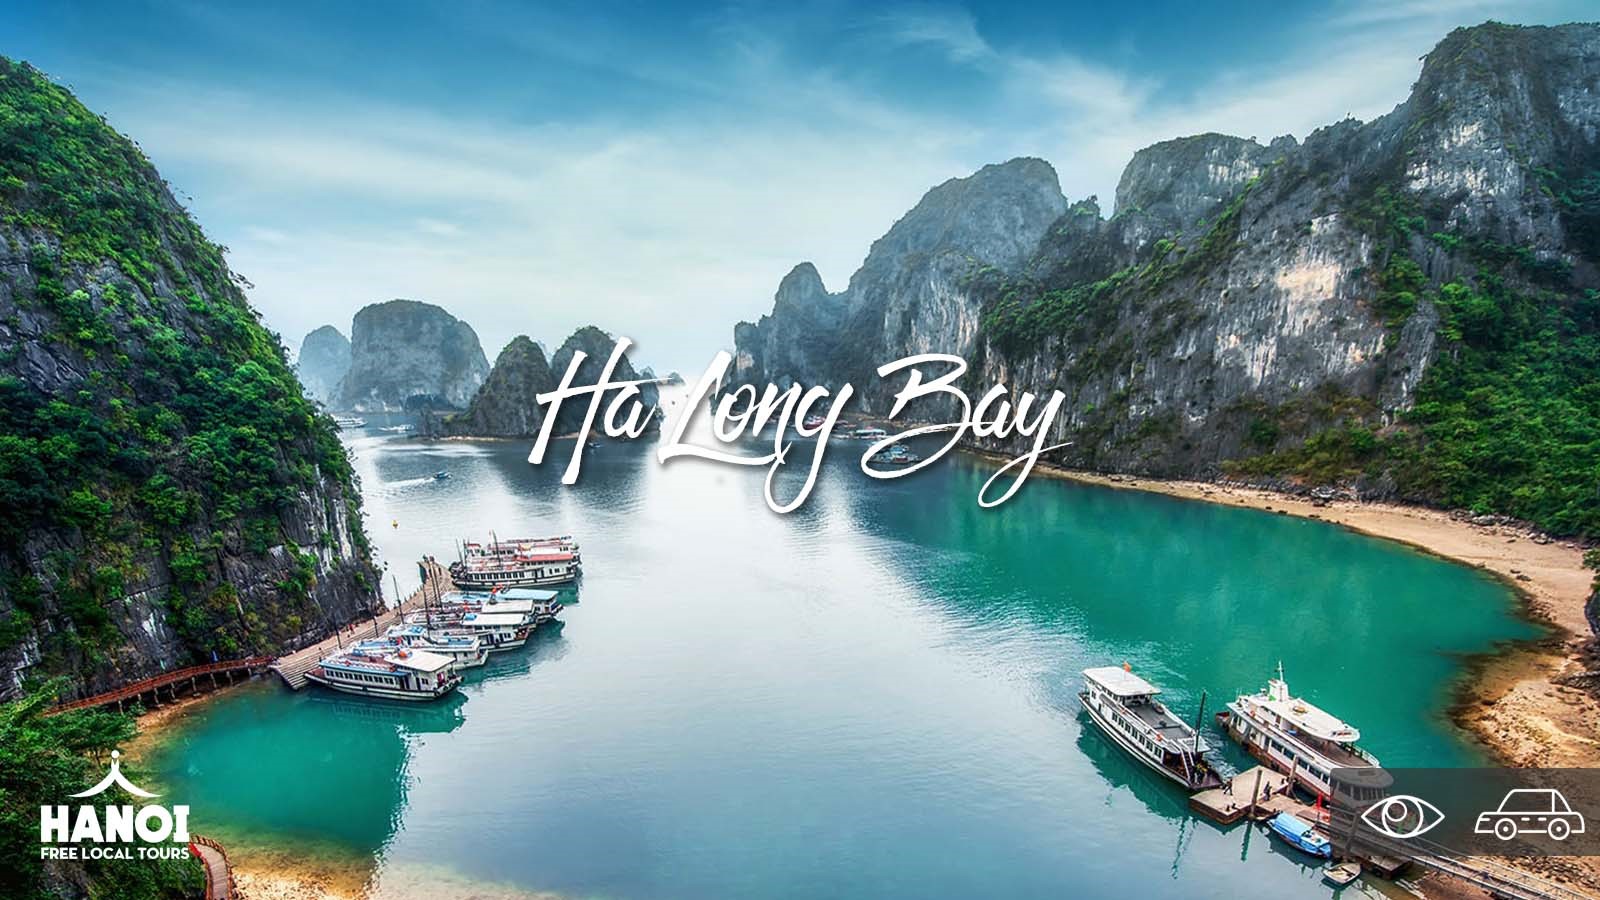 A breathtaking view in Halong Bay